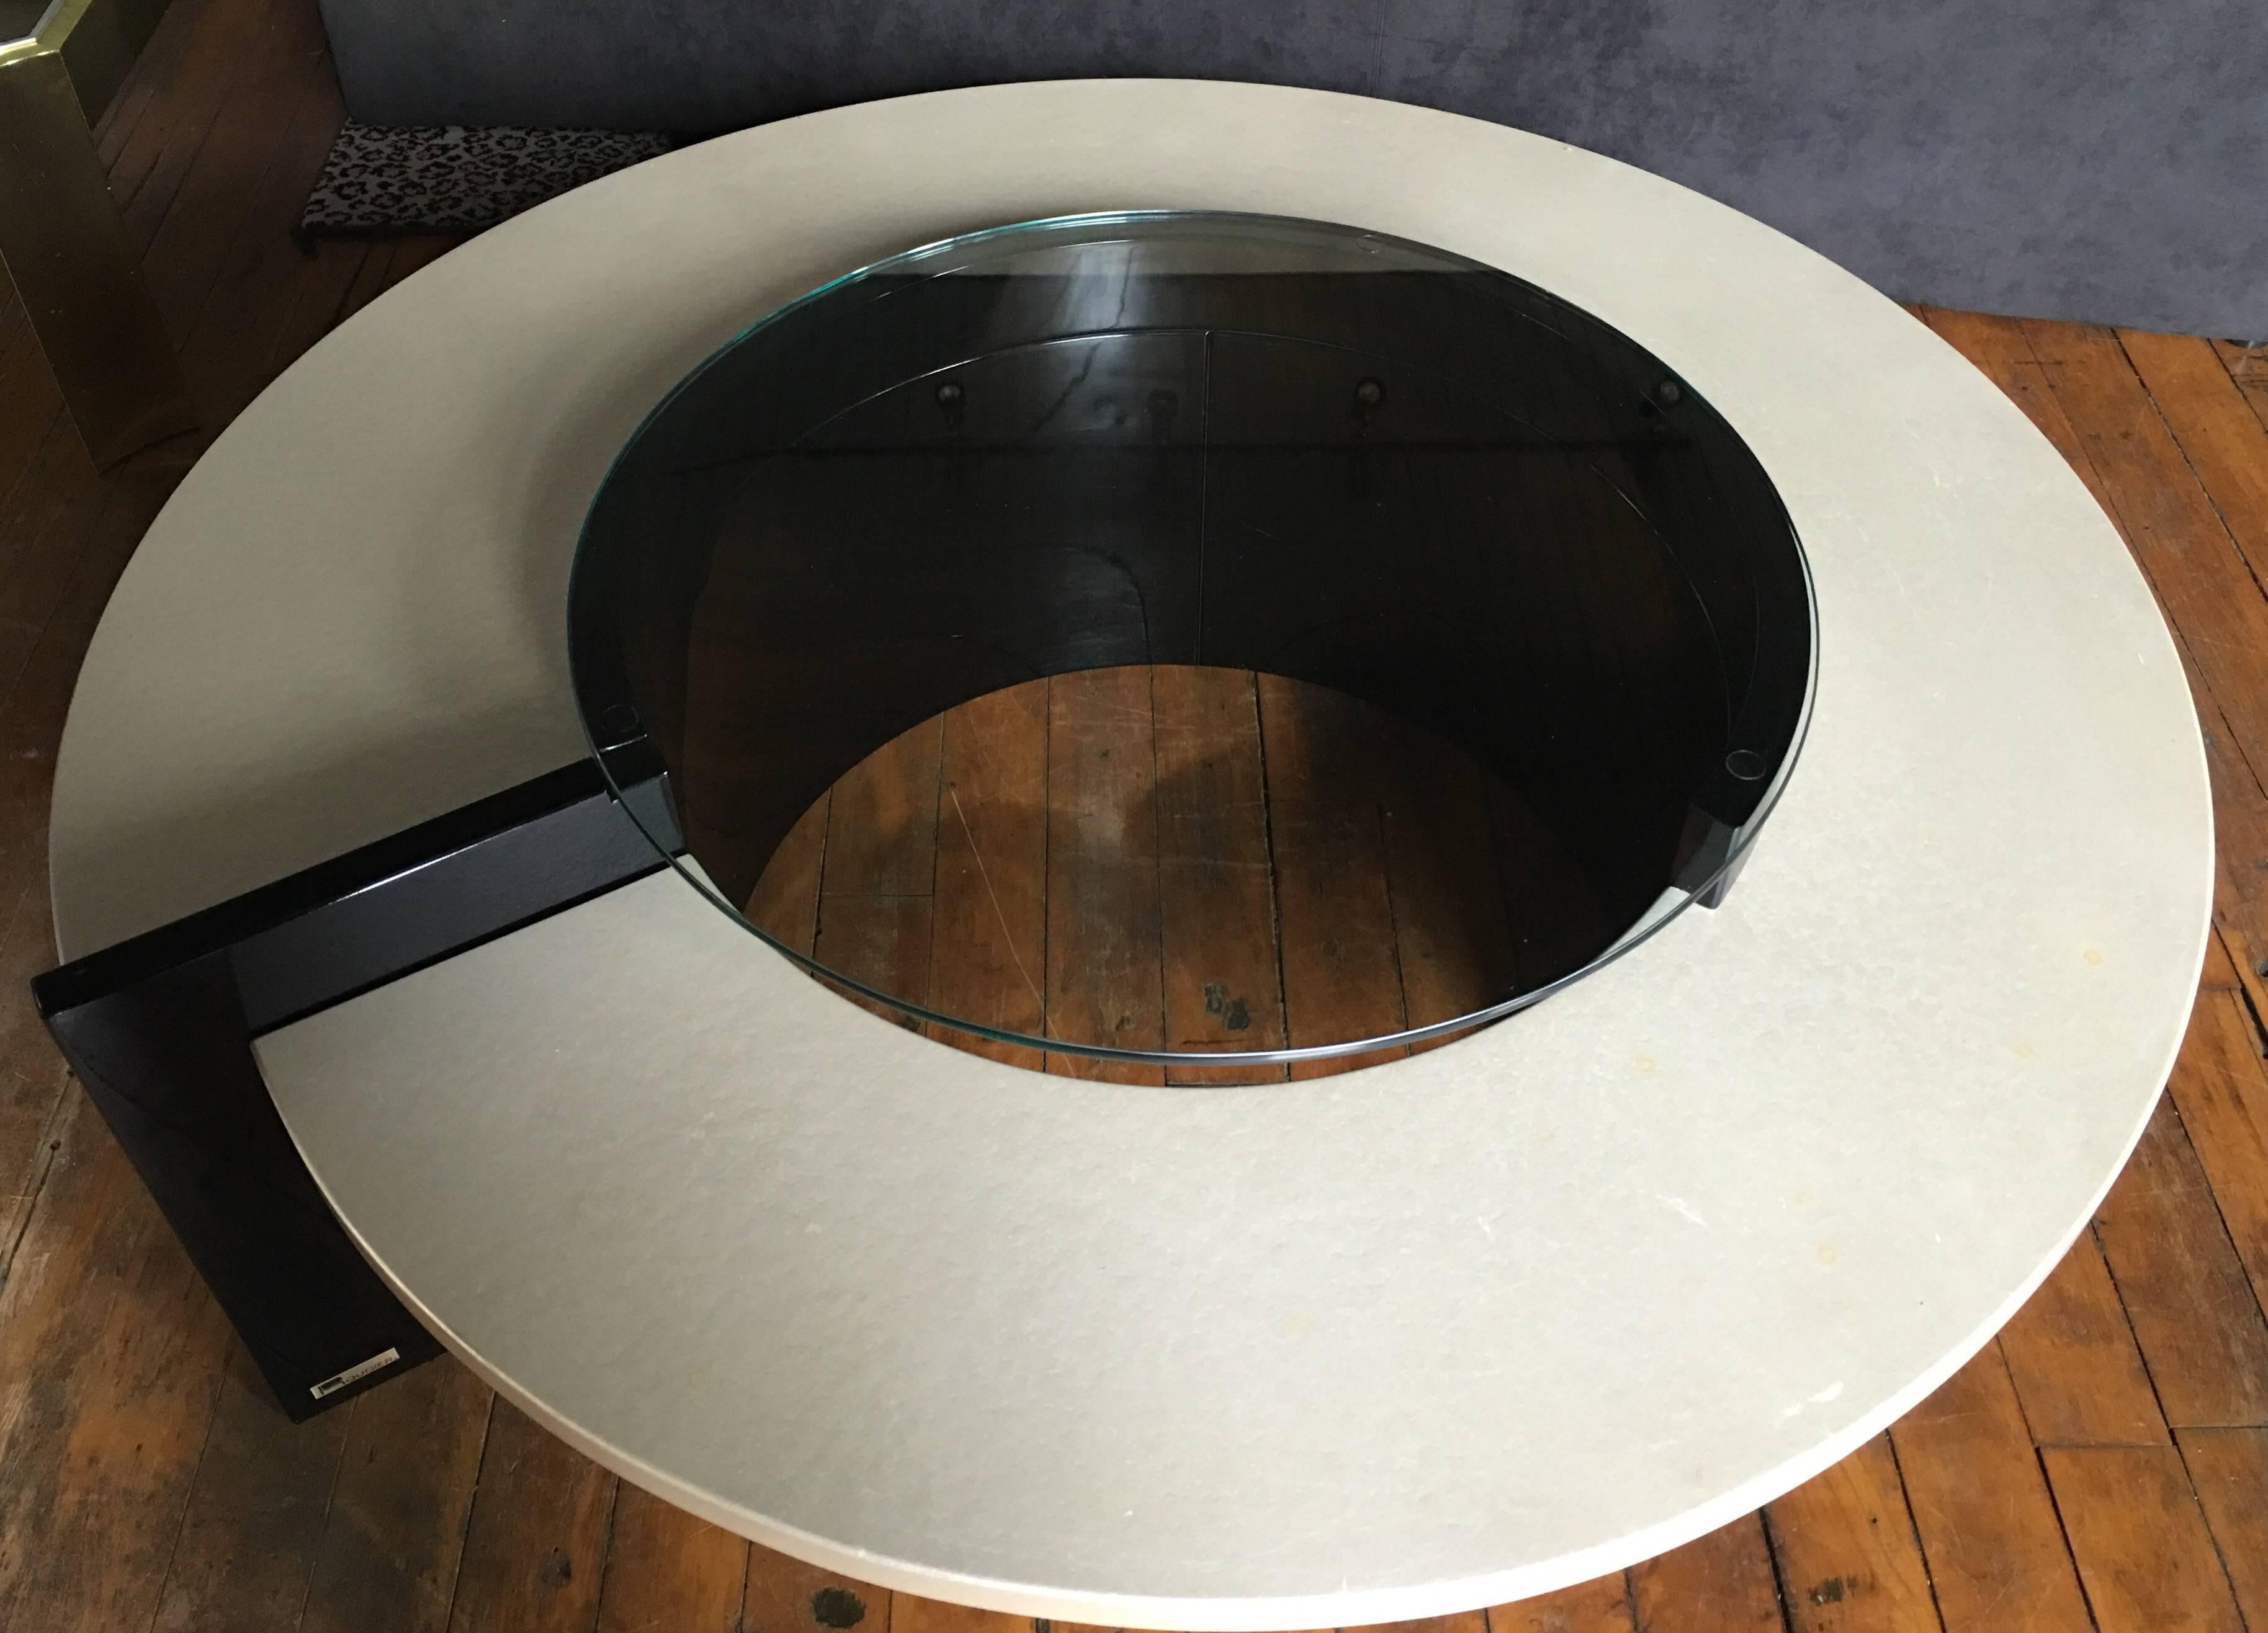 Sculptural abstract form cocktail table by Roger Rougier. Pearlized wood and black lacquer base with round clear glass top. Original metal Rougier label.